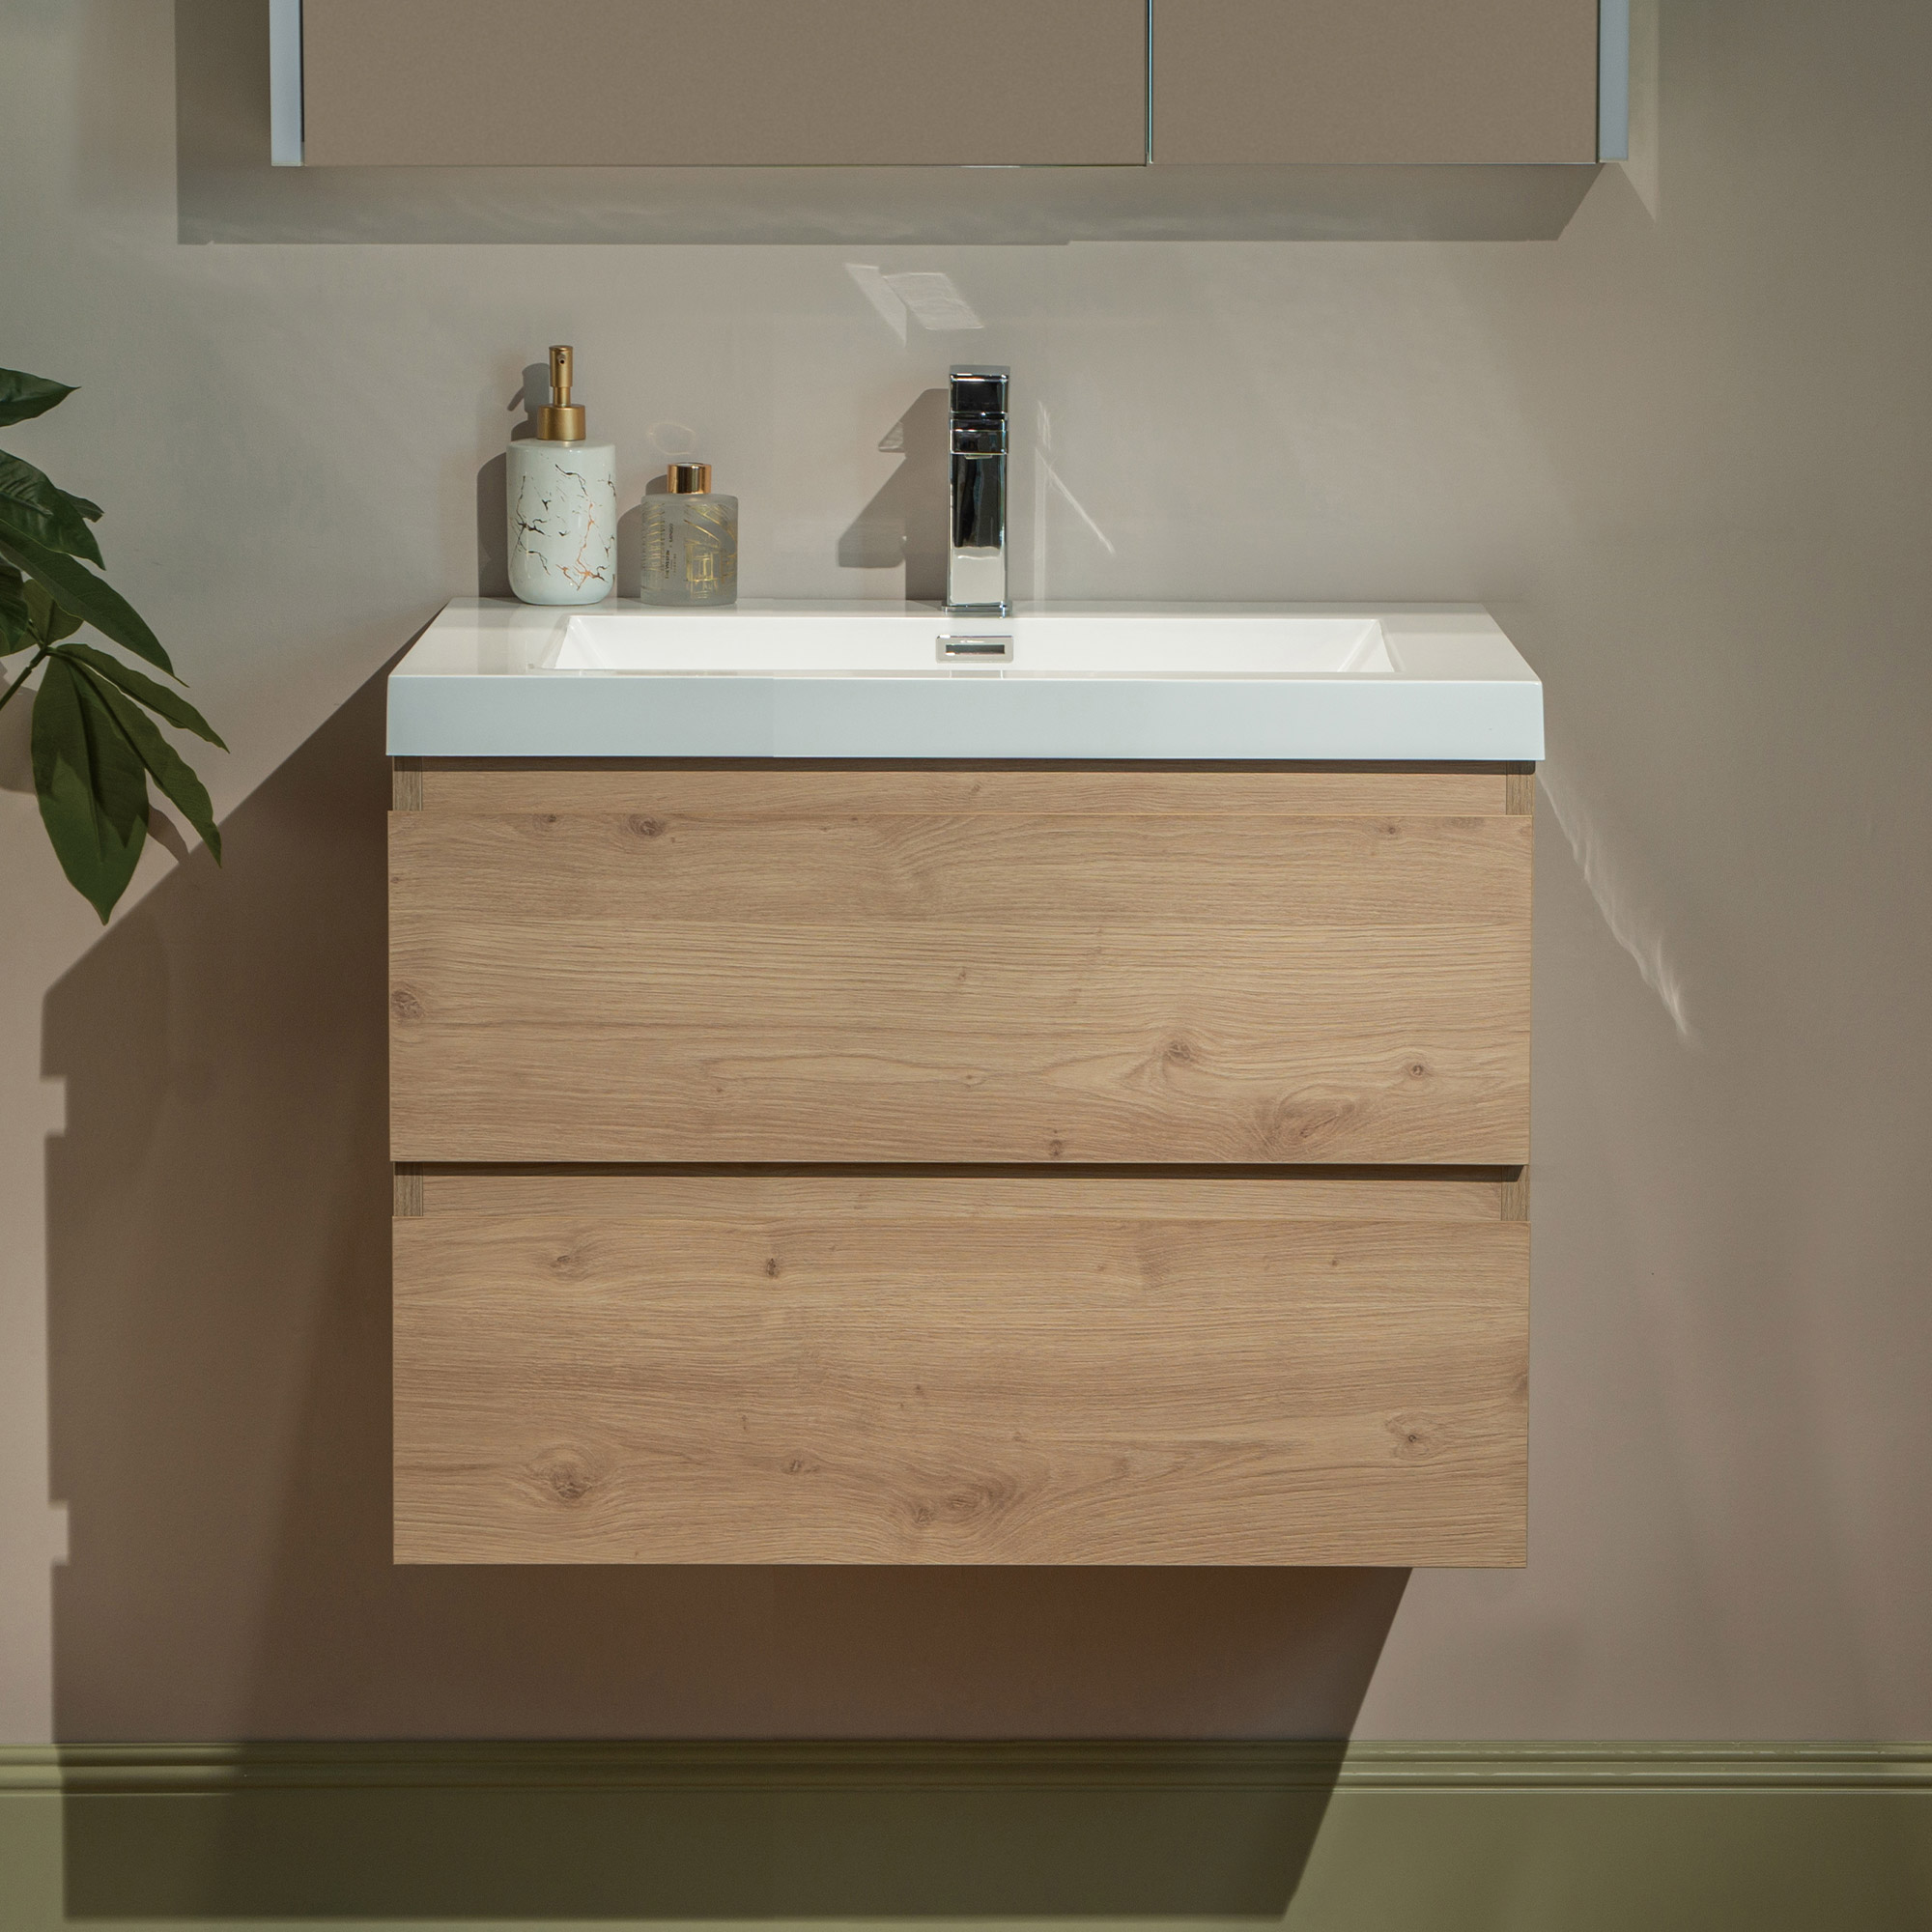 WOODBRIDGE 29-1/2 in. W x 19-5/8 in. D Wall Mounted Floating Vanity in Natural Oak with Resin Composite Vanity Top in Glossy White